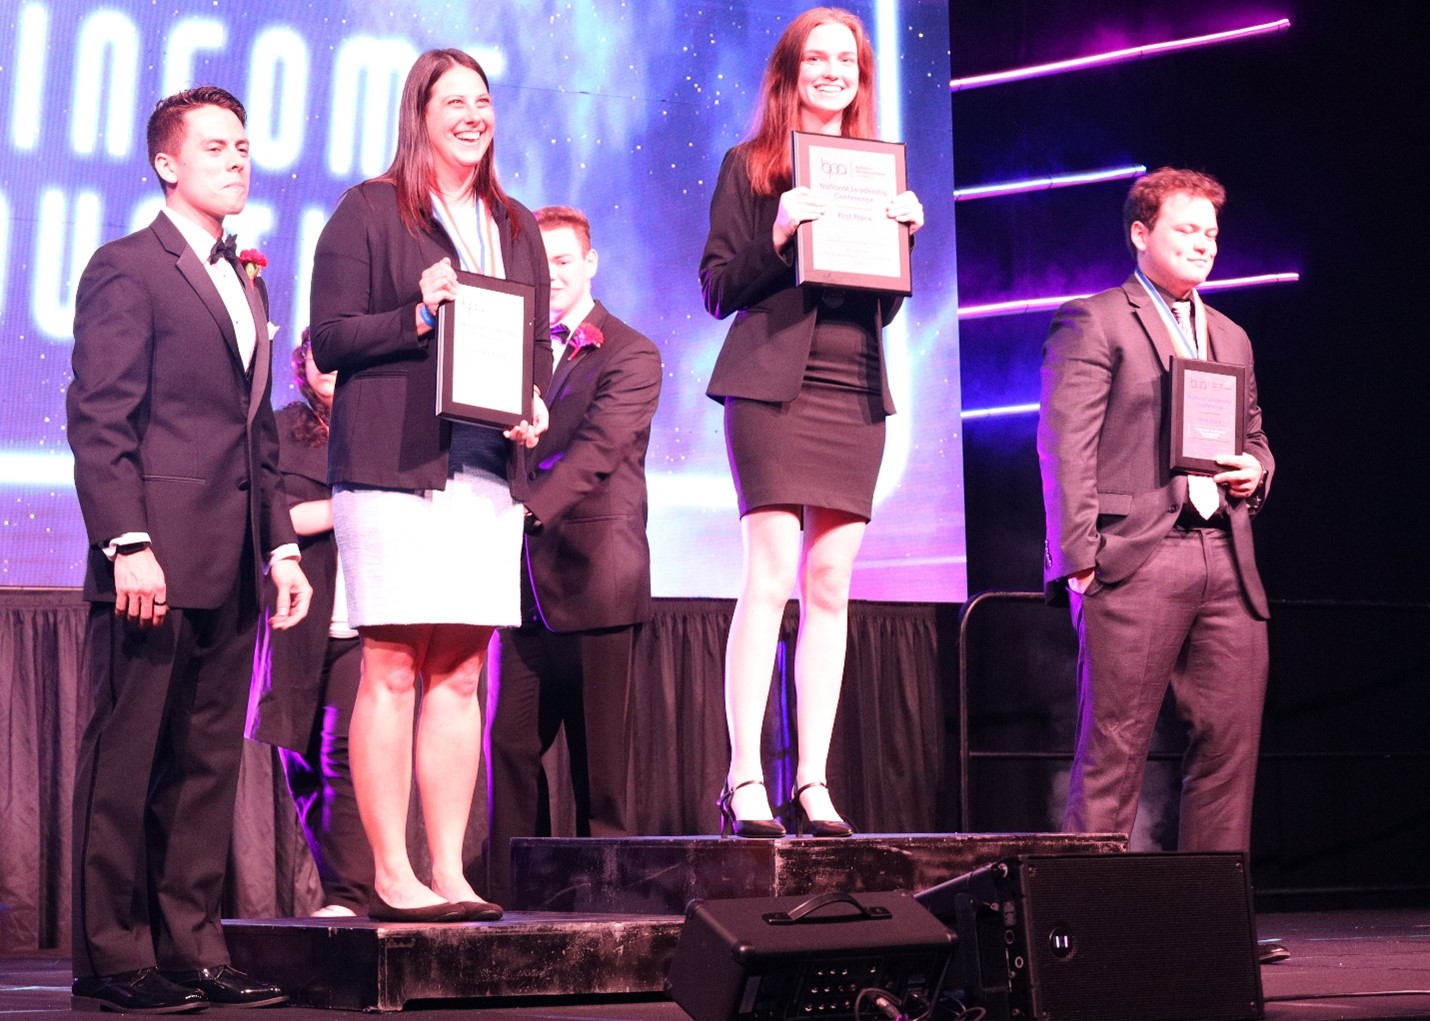 Davenport students earned 49 topfive finishes at the 2022 BPA National